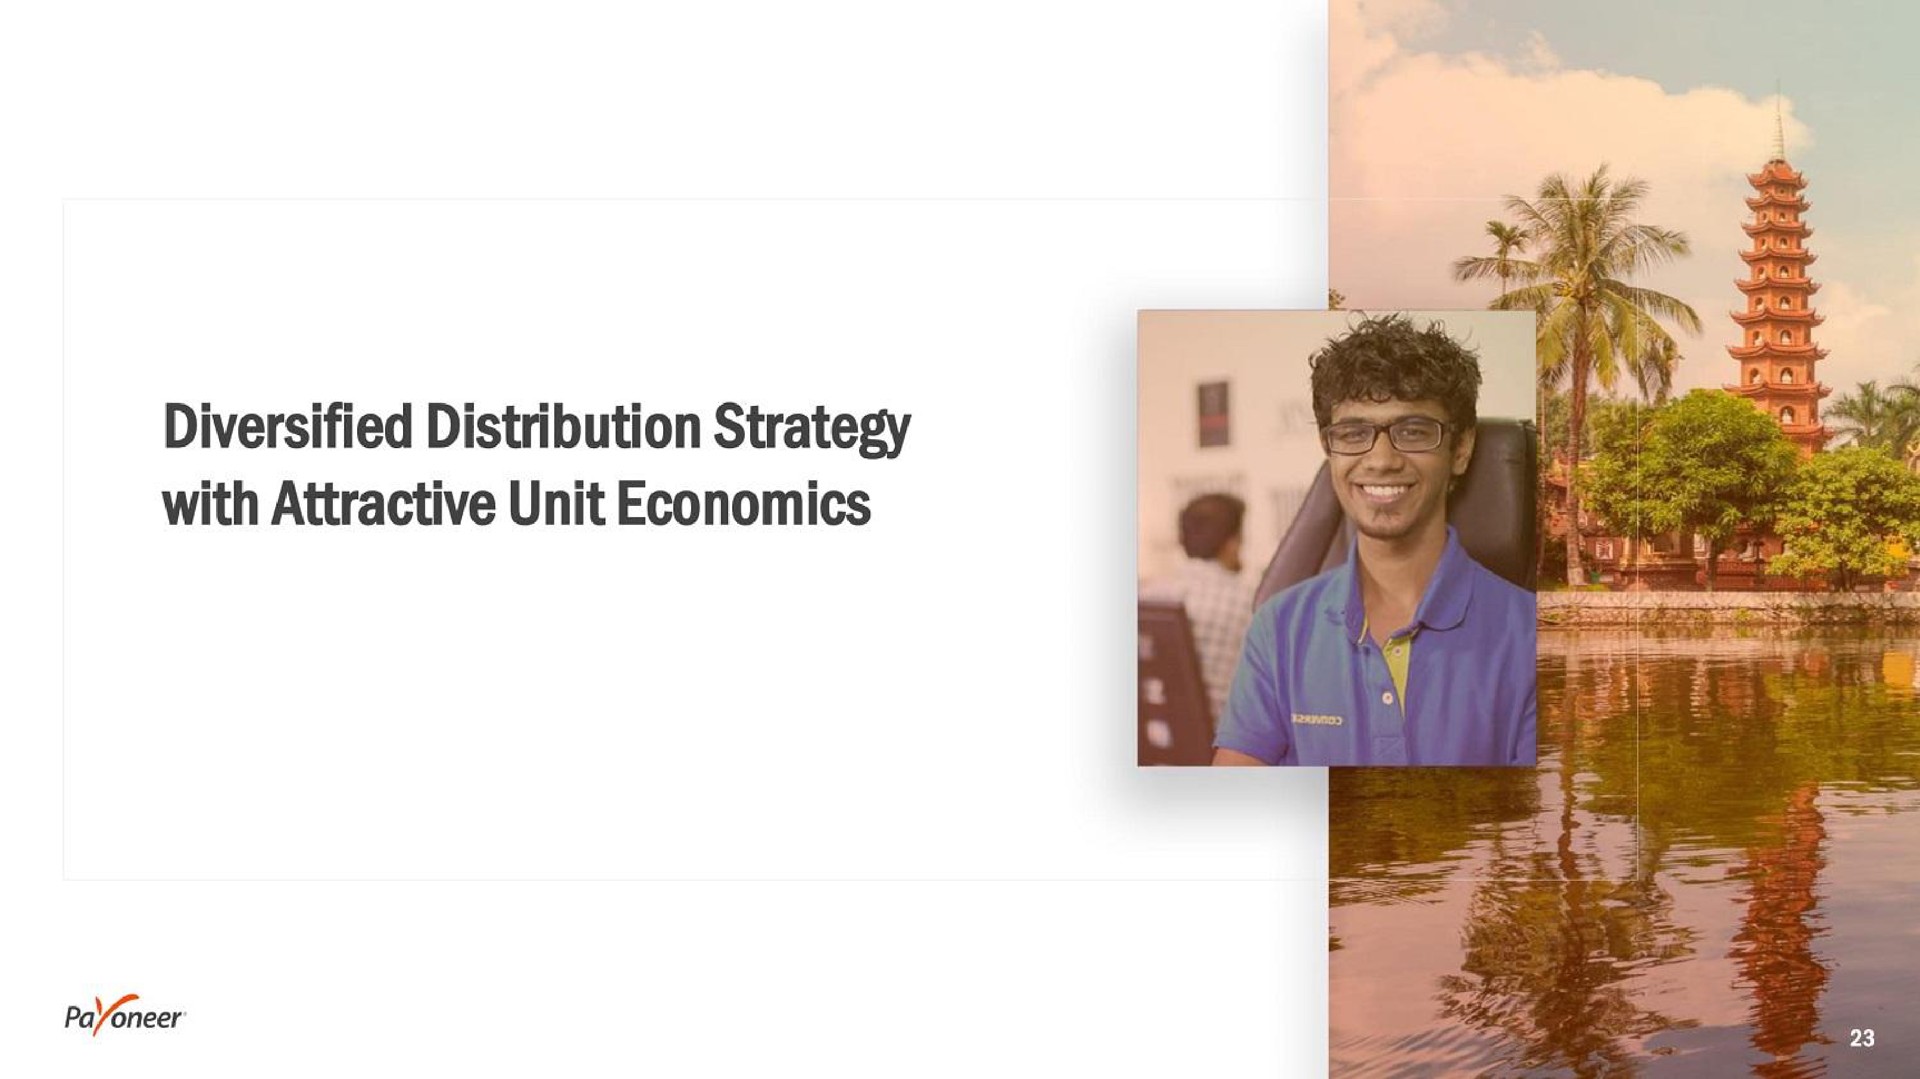 diversified distribution strategy with attractive unit economics | Payoneer